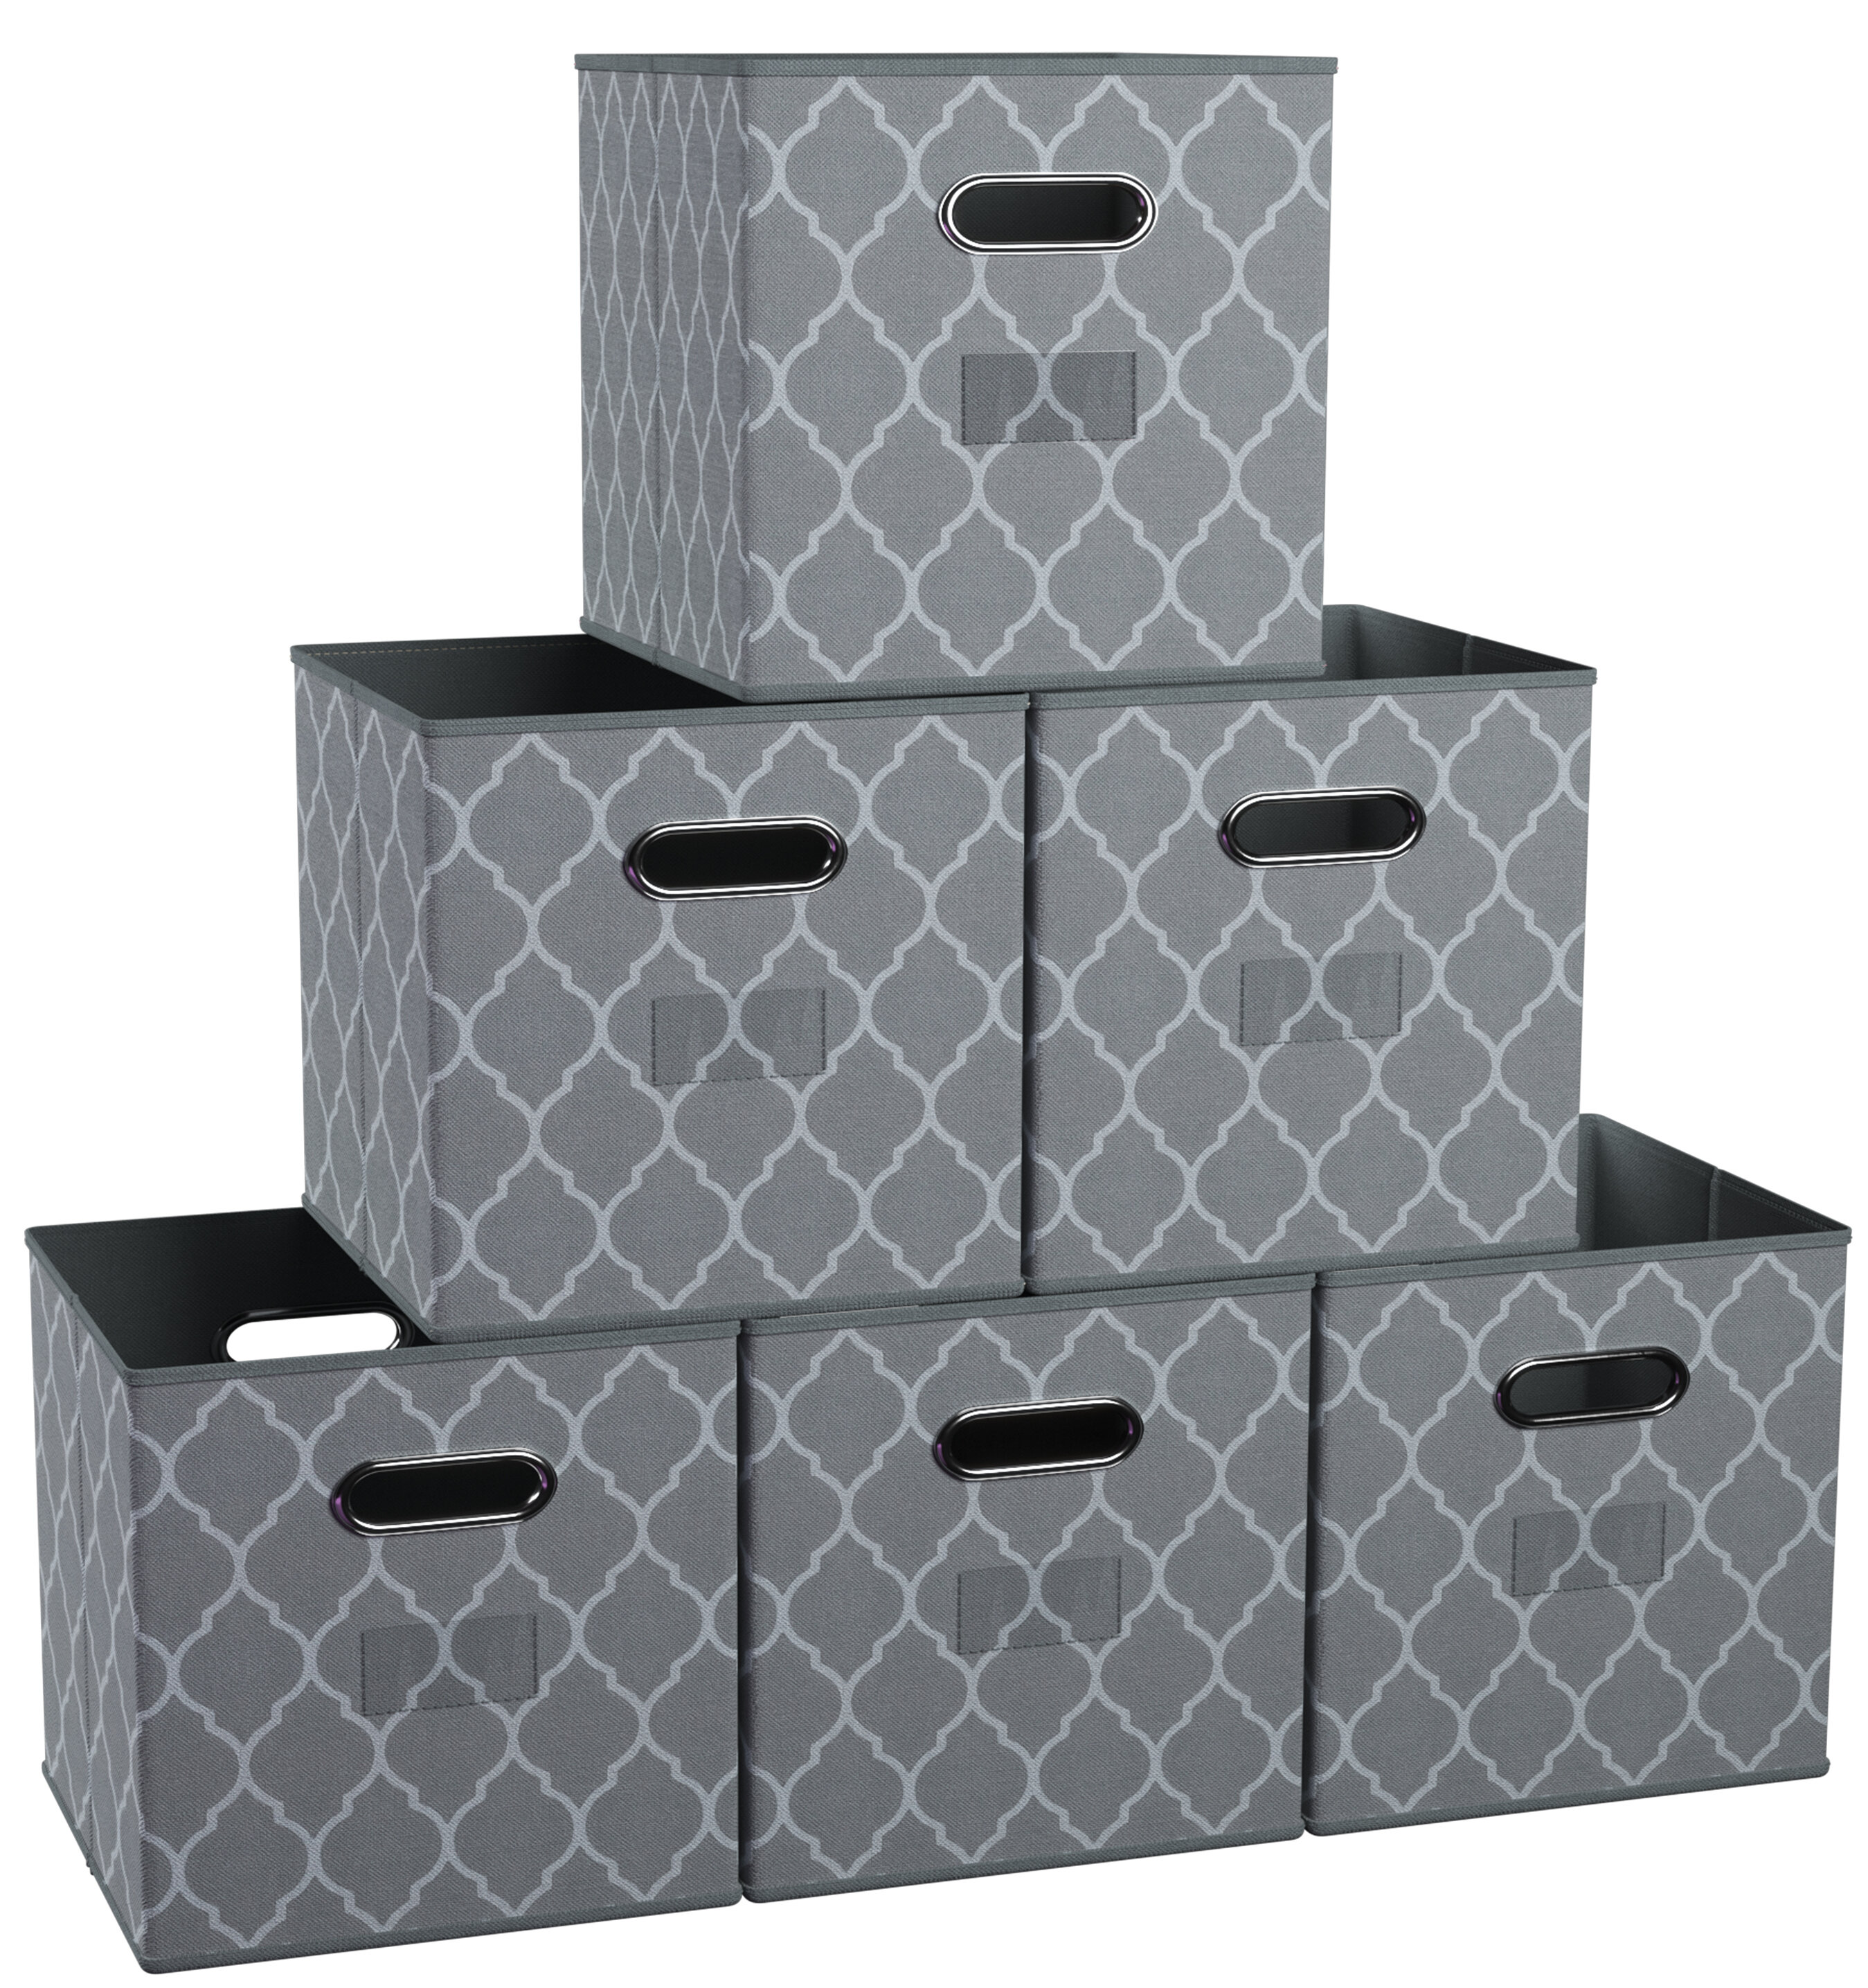 Foldable Storage Bins Basket Cube Organizer with Dual Handles and Window Pocket - 6 Pack Red Barrel Studio Color: Gray